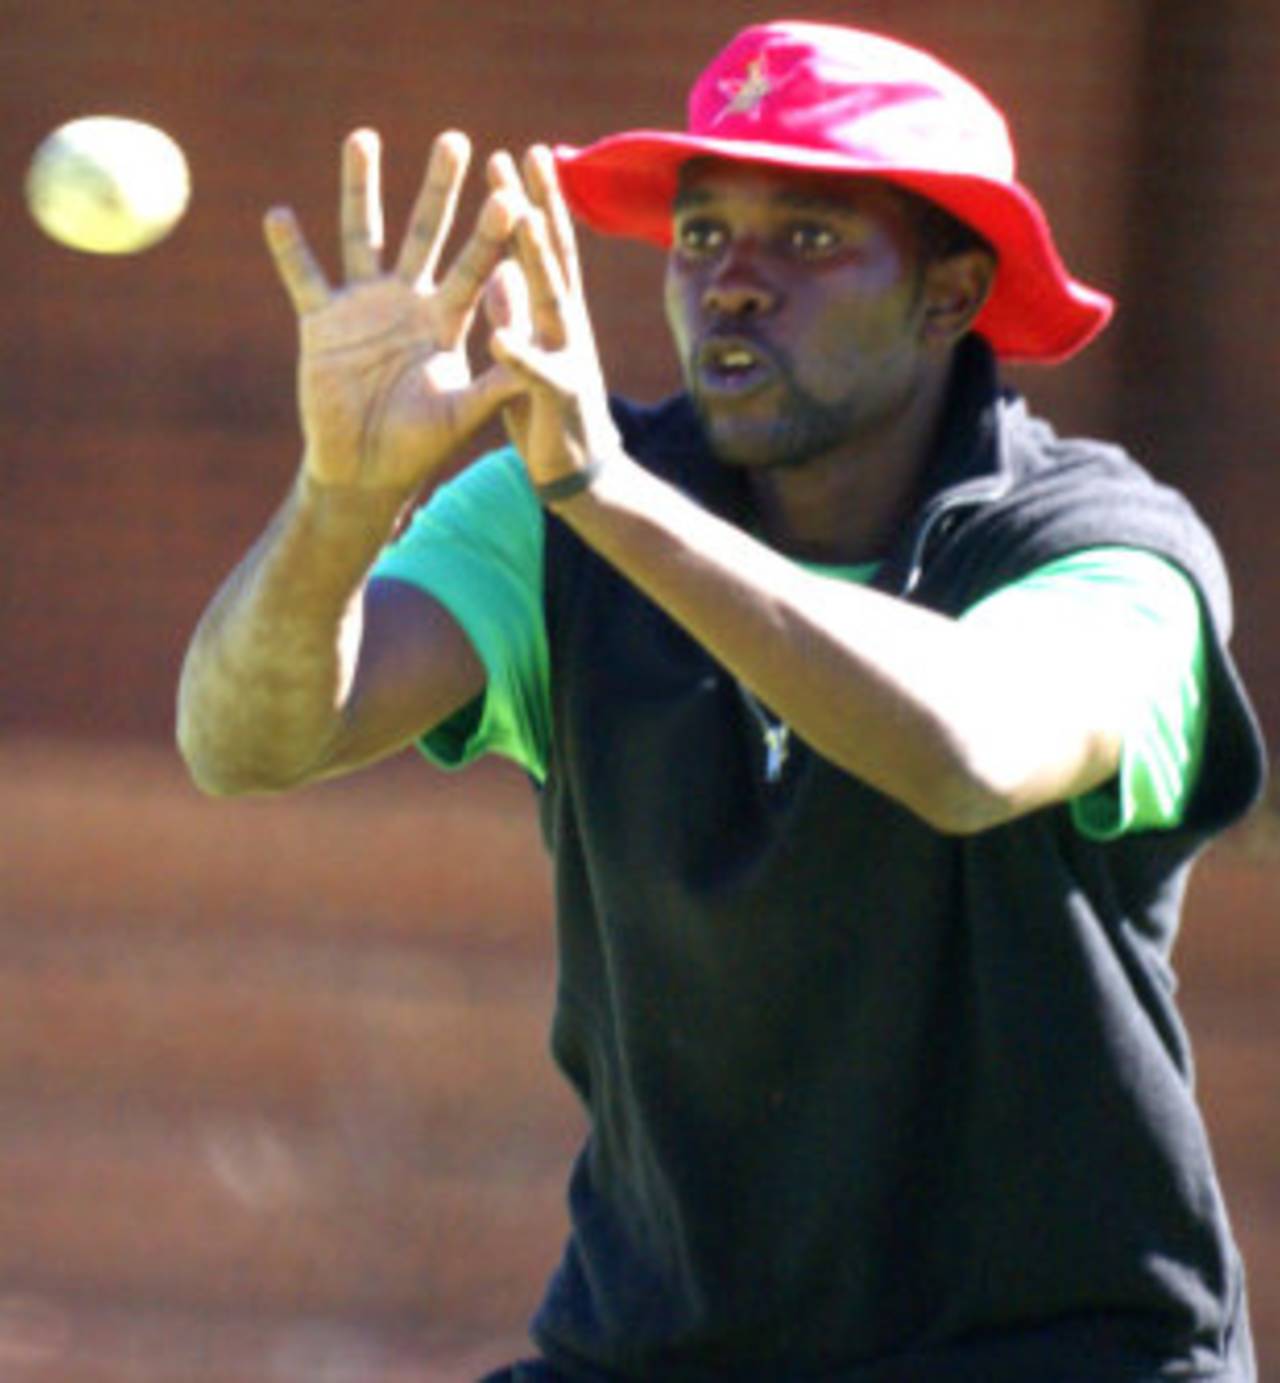 Elton Chigumbura takes part in a fielding drill, Bulawayo, May 1, 2013